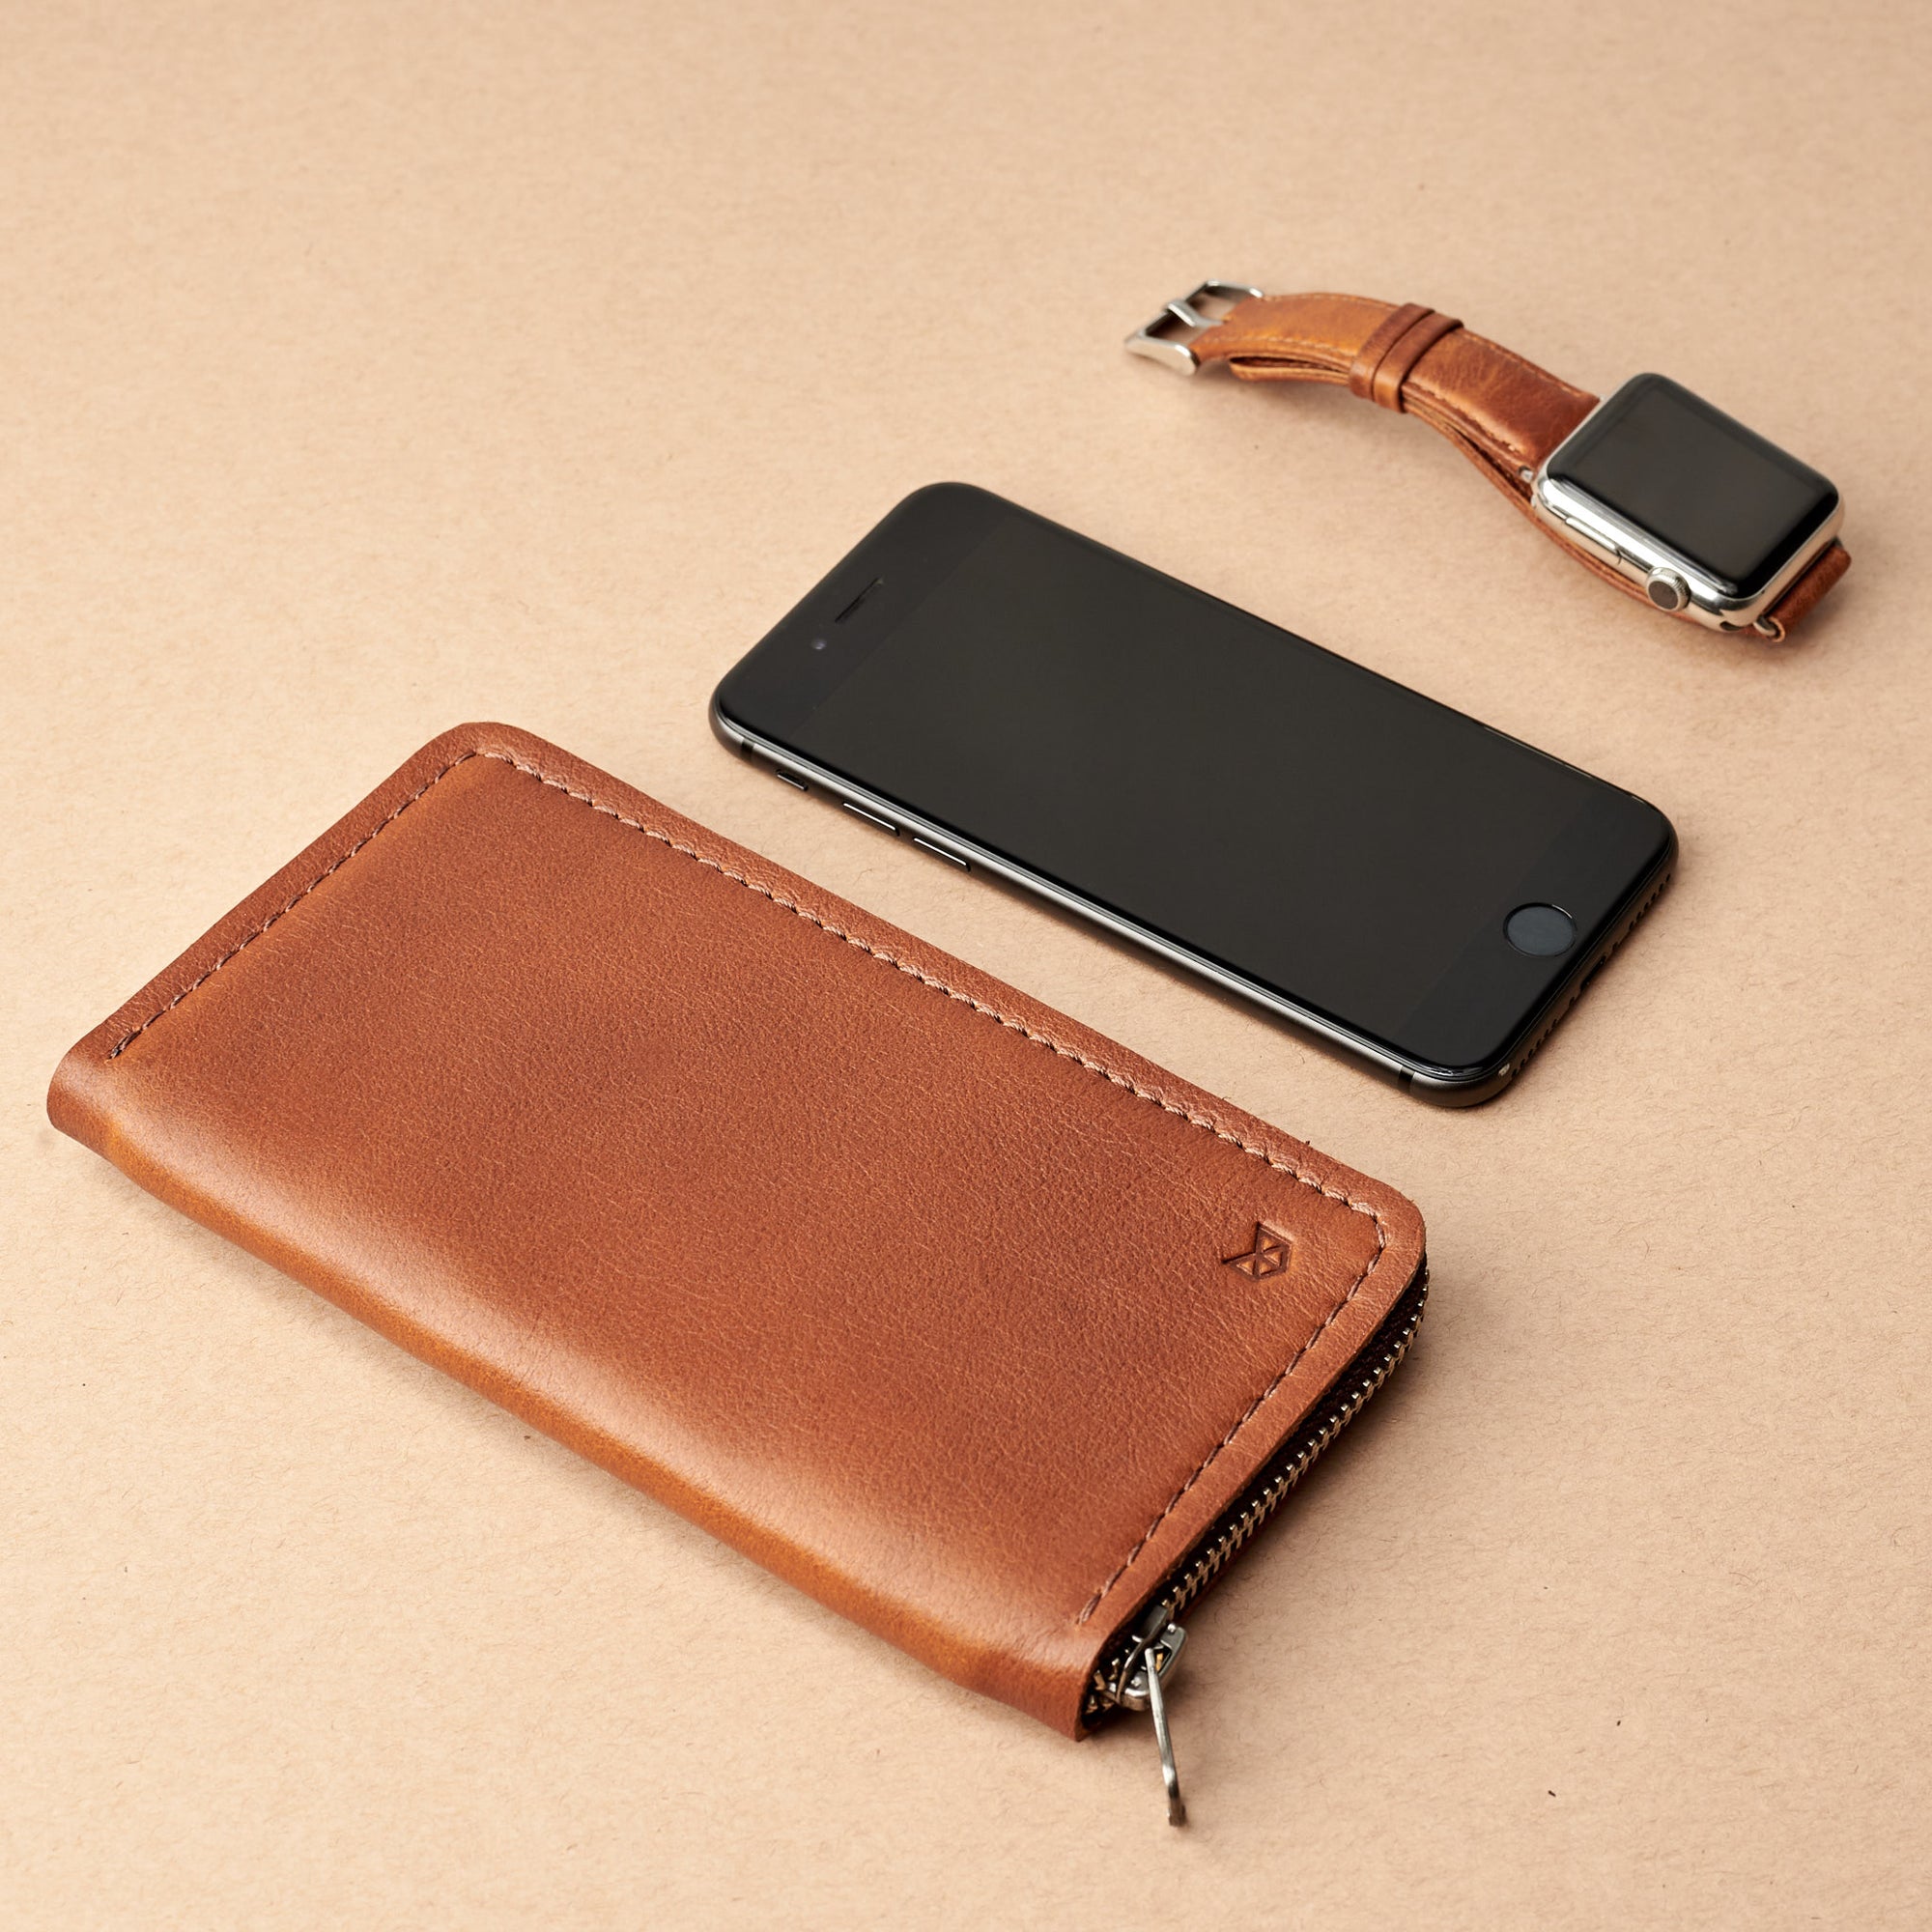 Styling Apple. Tan iPhone leather wallet stand case for mens gifts. iPhone xs, iPhone xs Max, iPhone xr, iPhone x, iPhone 10, iPhone 8 plus leather stand sleeve. Crafted by Capra Leather.